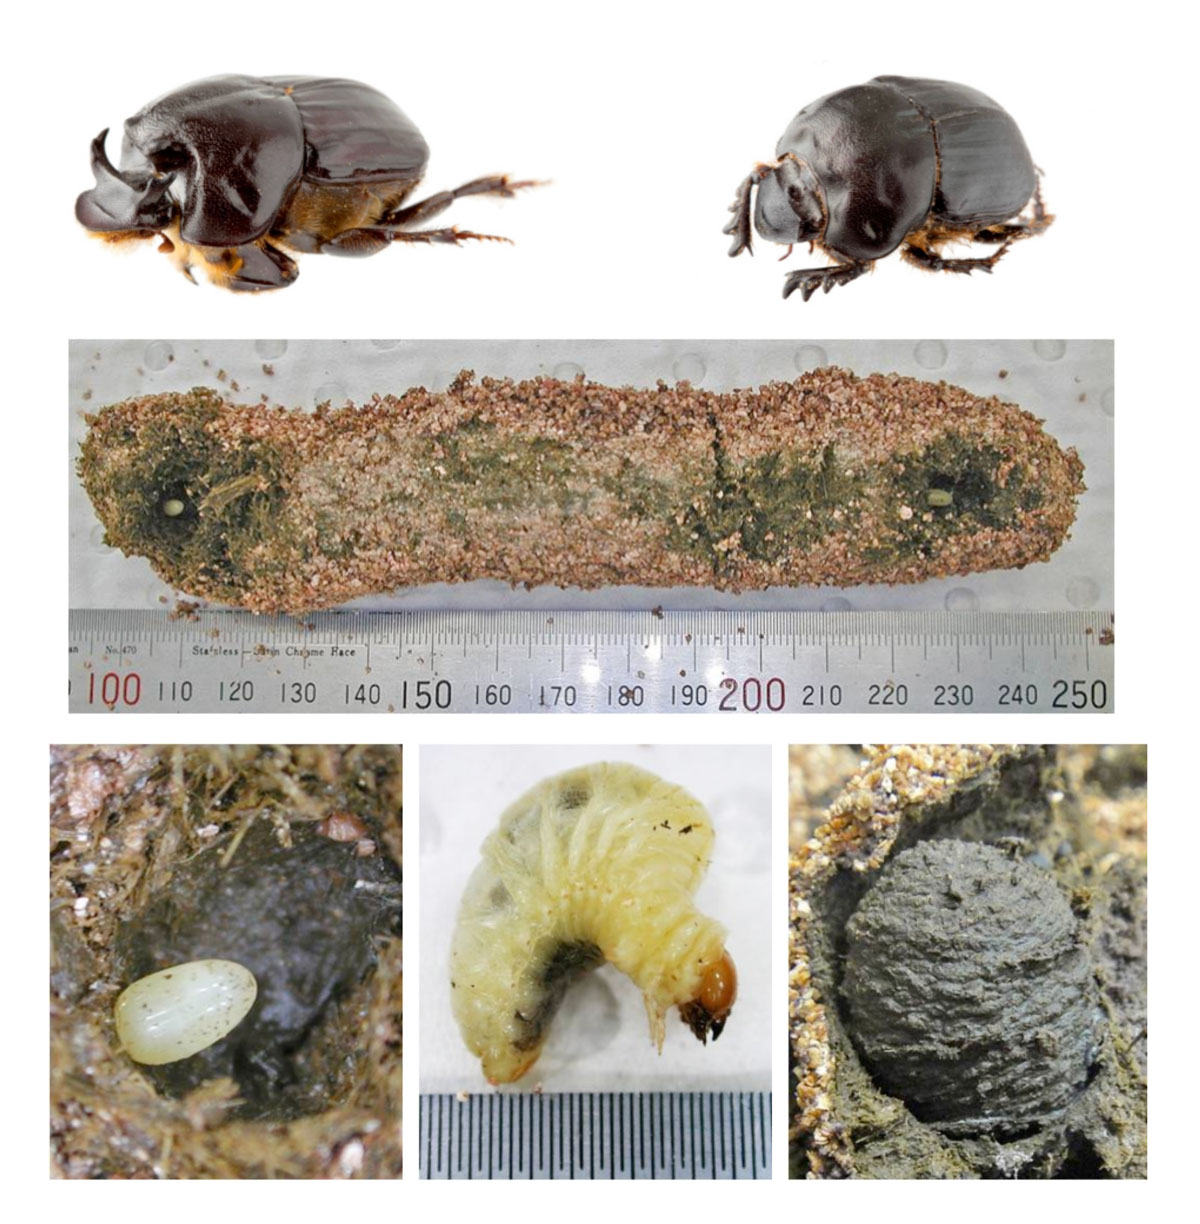 Figure 2. Bubas bubalus life stages. Top left, adult male. Top right, adult female. Middle, natural brood mass with brood chamber dissected at each end revealing the egg. Bottom left, egg in brood chamber. Bottom middle, late instar larva. Bottom right, faecal shell. Source: Taken from Wright et al. 2015